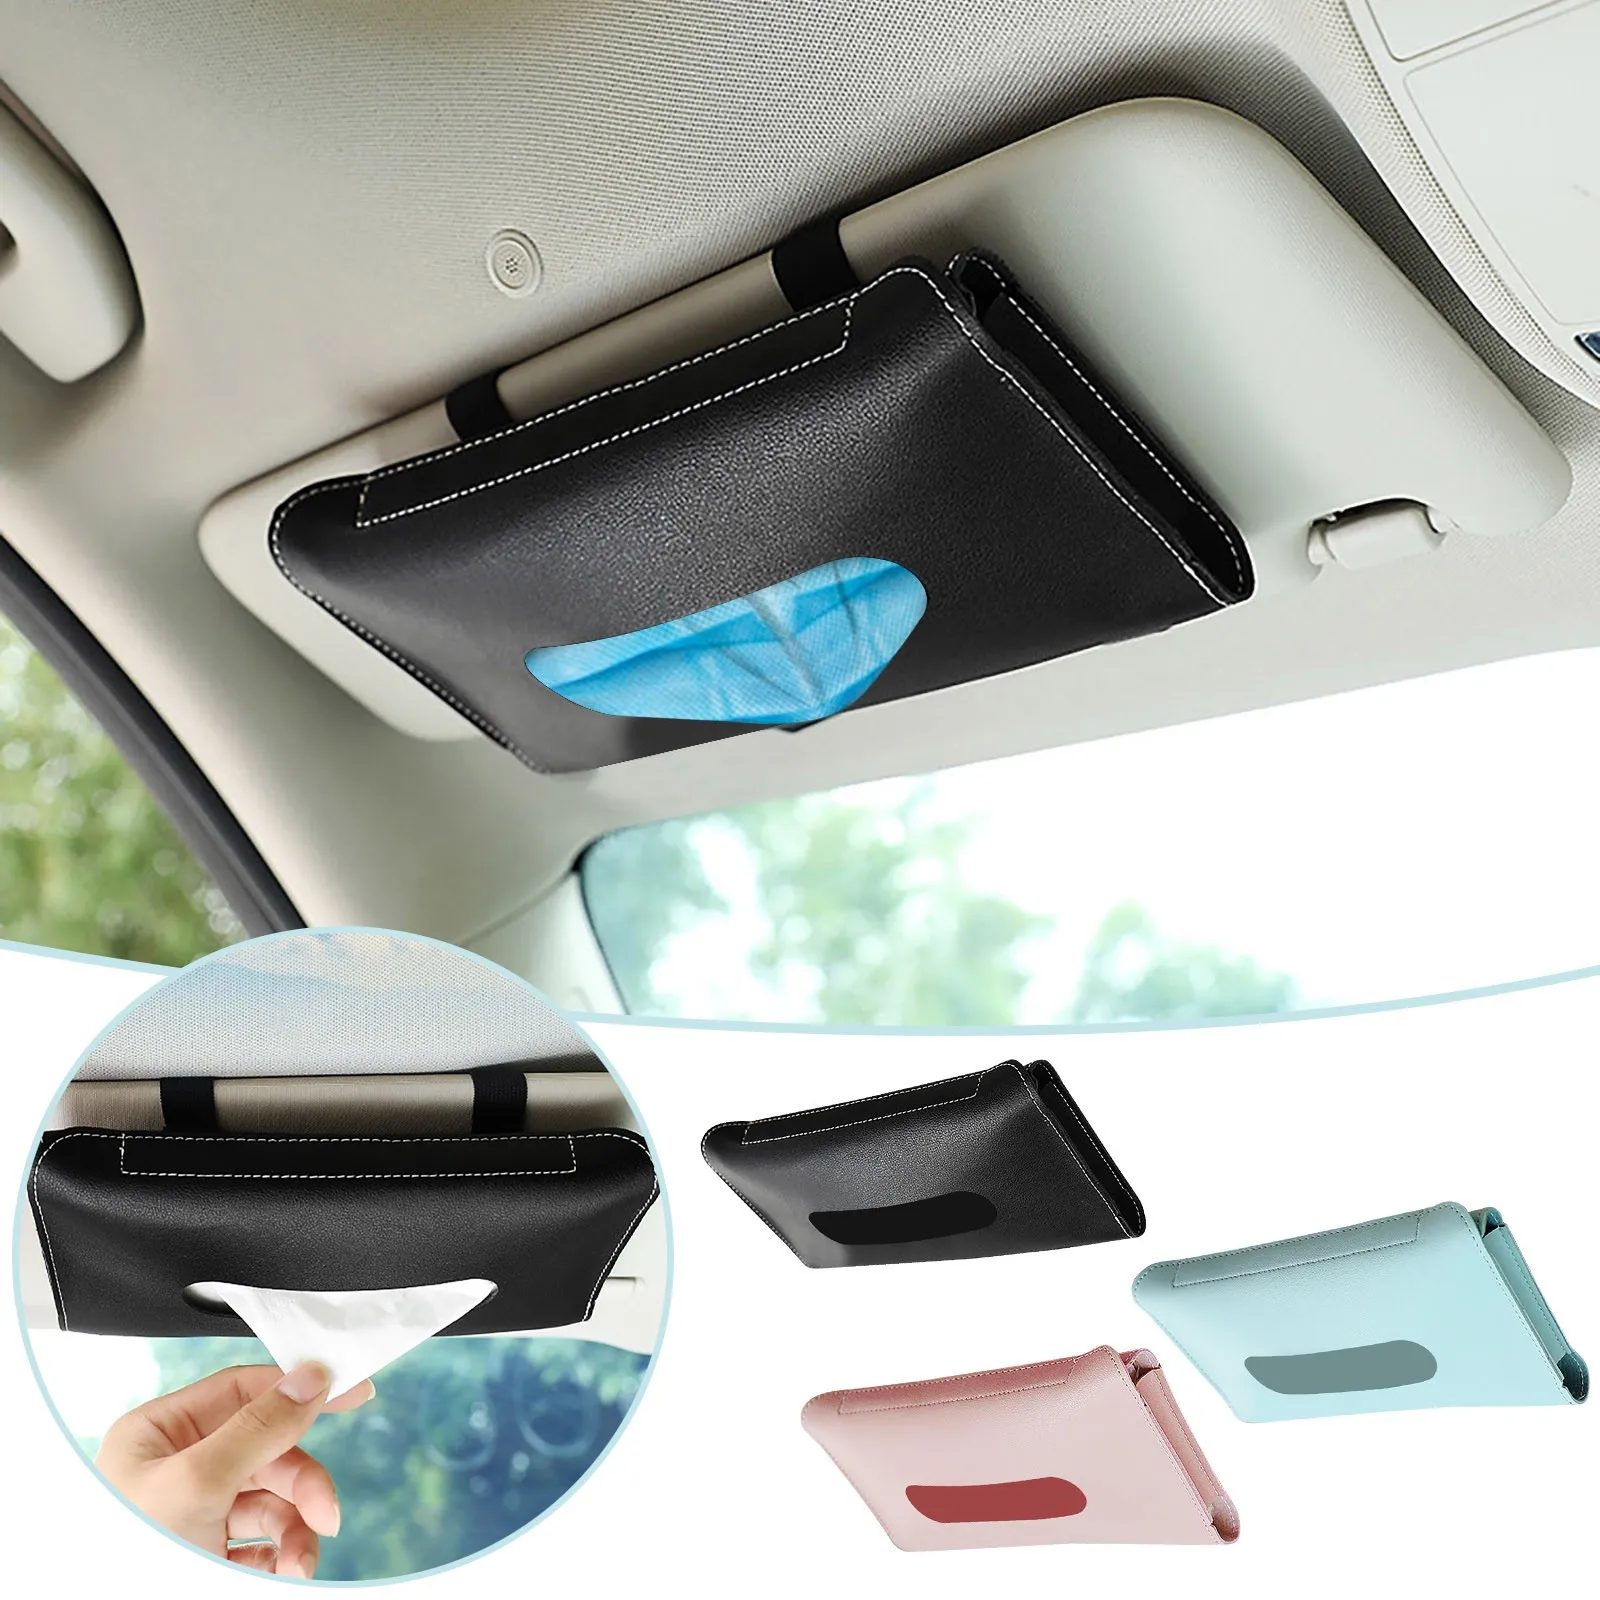 MoKo Car Sun Visor Tissue Box Holder Brown Premium PU Leather Auto Foldable Hanging Paper Organizer Towel Napkin Pumping Box Cover for Car Home Office Use 